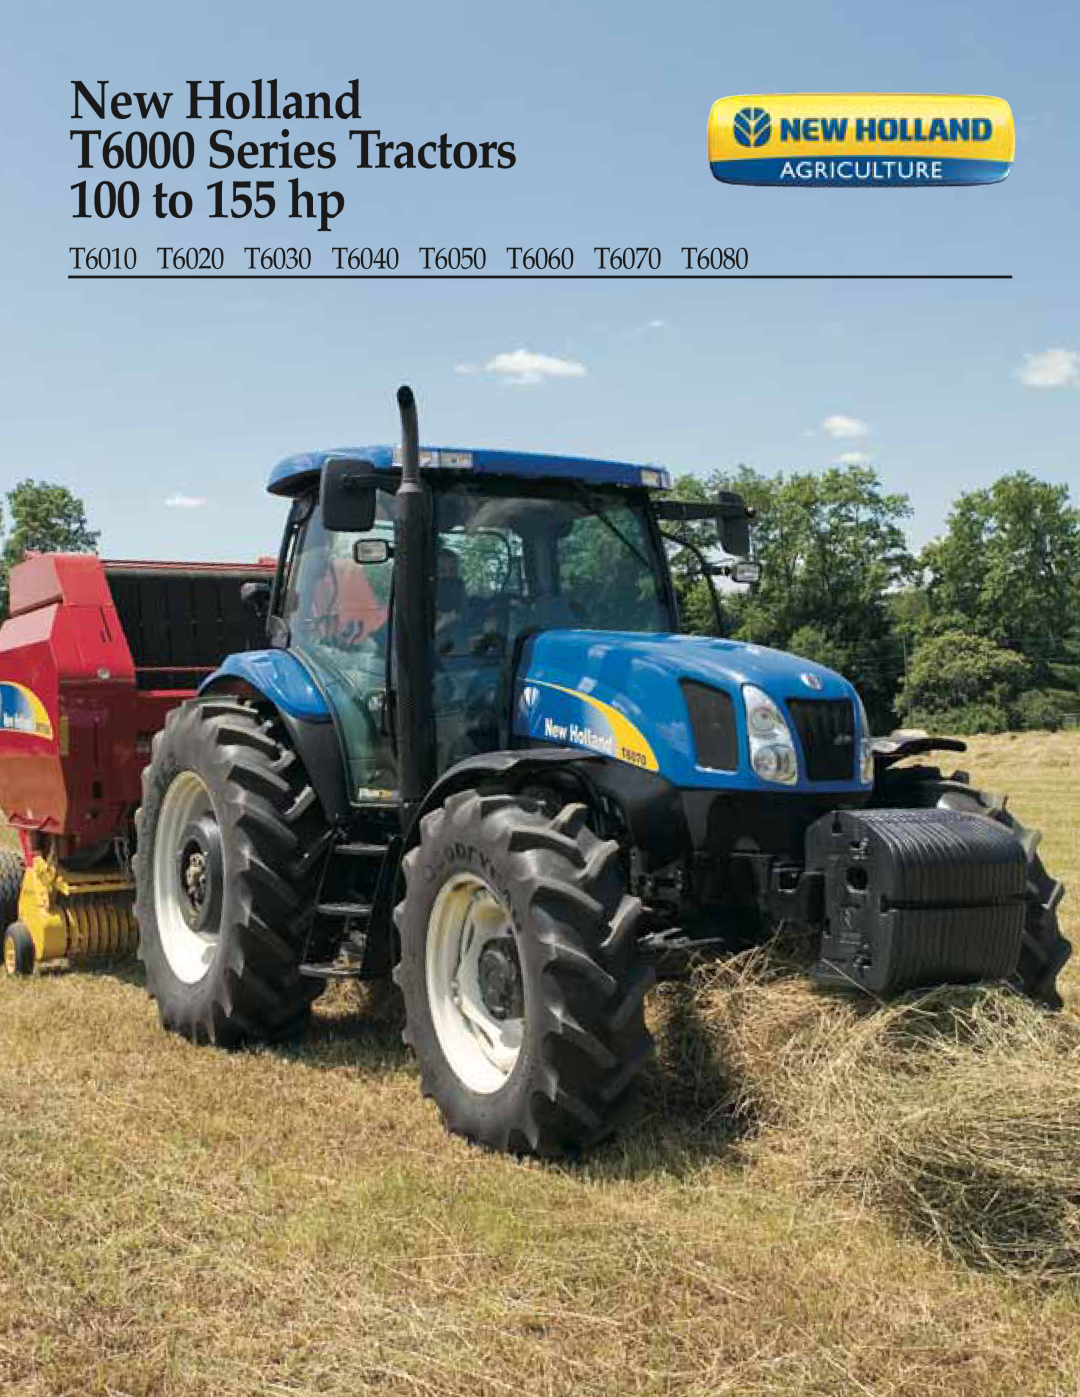 New Holland manual New Holland T6000 Series Tractors 100 to 155 hp, T6010 T6020 T6030 T6040 T6050 T6060 T6070 T6080 